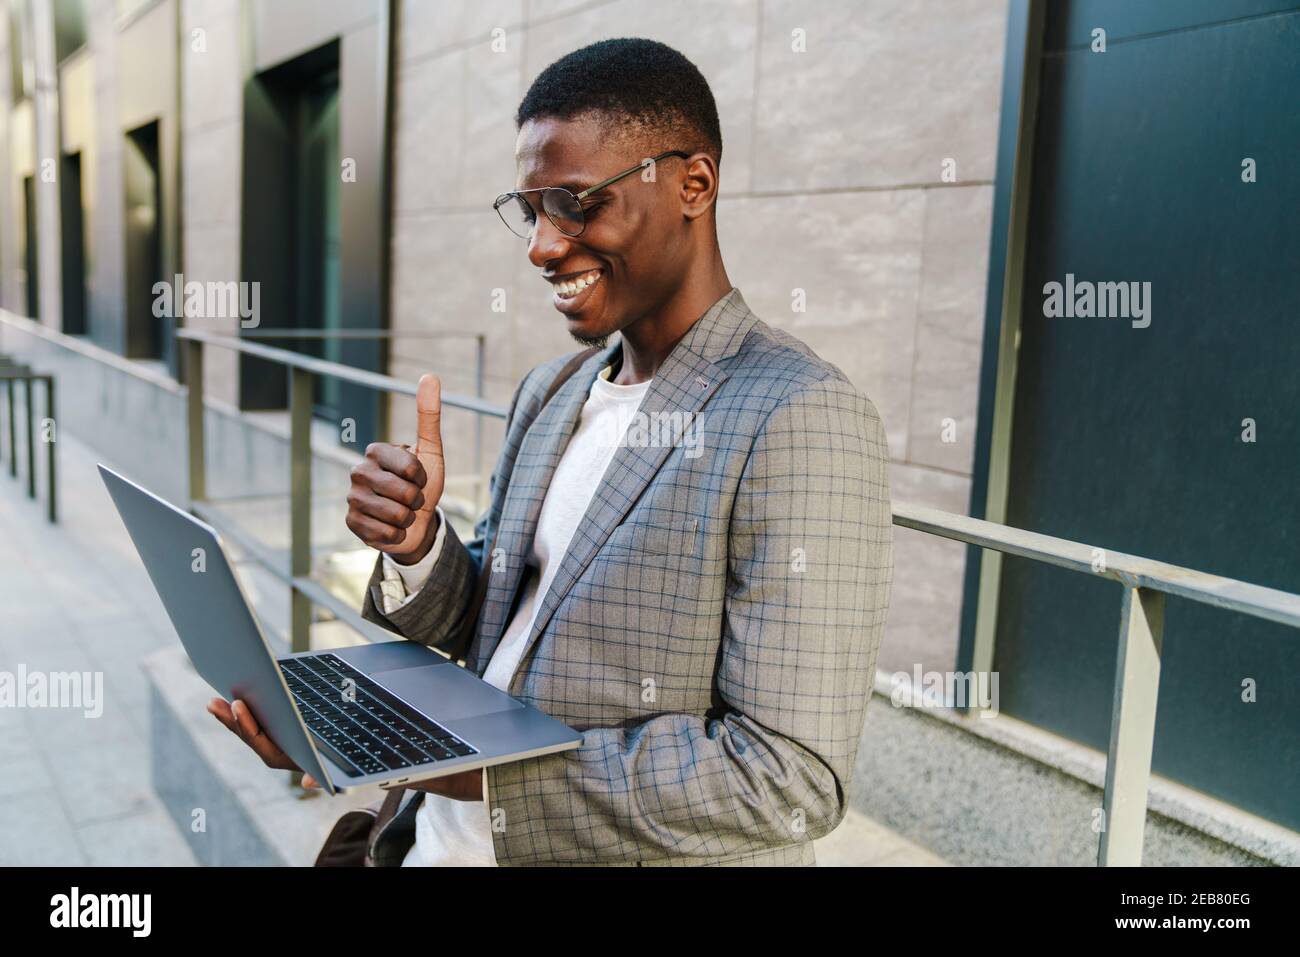 Joyful african american man showing thumb up and using laptop while standing outdoors Stock Photo